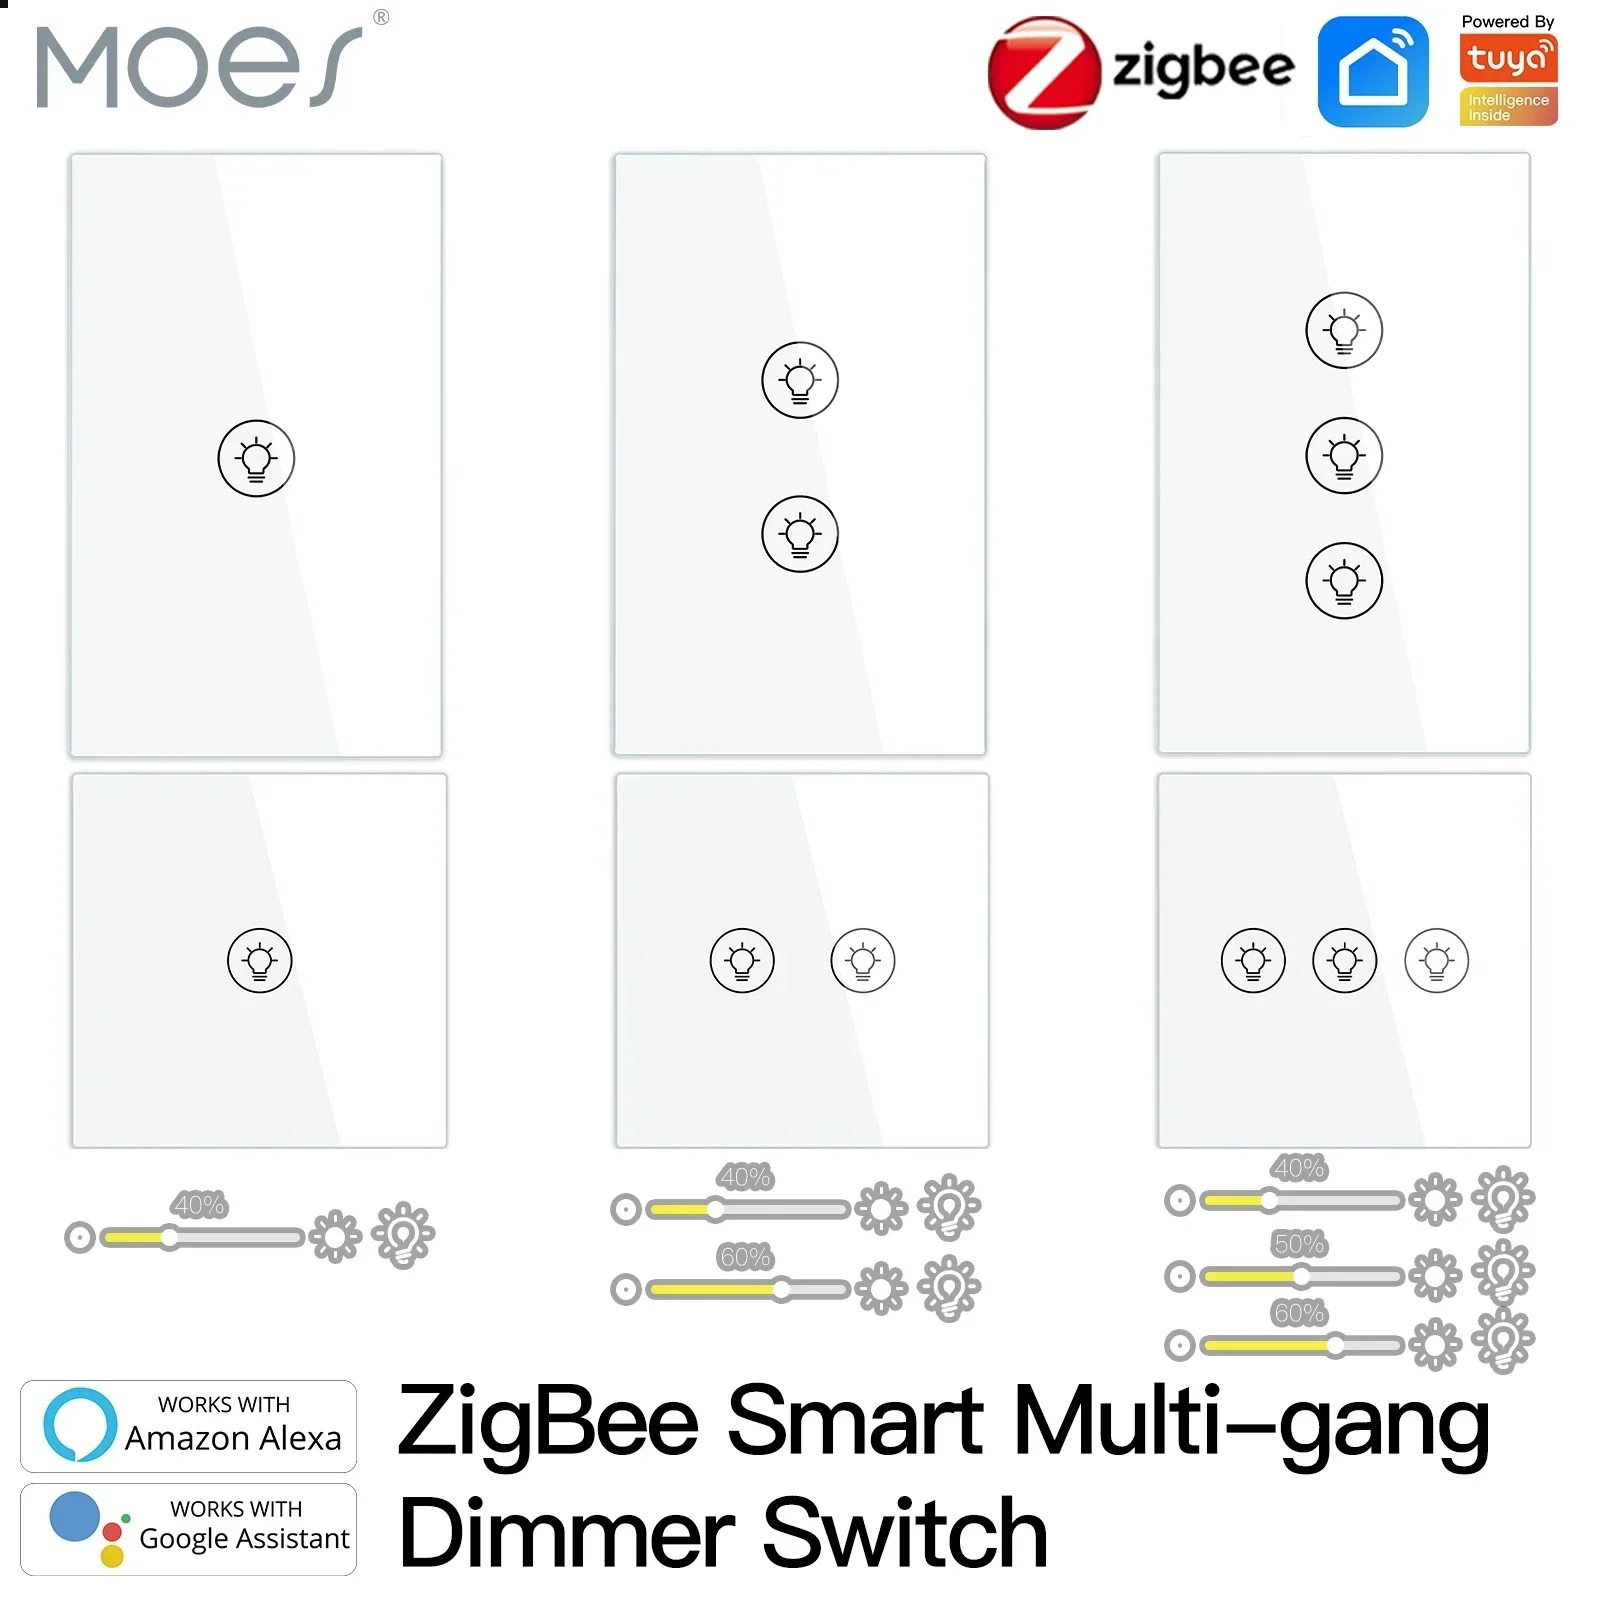 Smart ZigBee Multi-gang Light Dimmer Switch Independent Control Smart Tuya APP Control Works with Alexa Google Home 1/2/3 Gang tuya e27 led lights bulb wifi rgb cw ww led lamp dimmable timer smart bulb works with alexa google for smart home decora